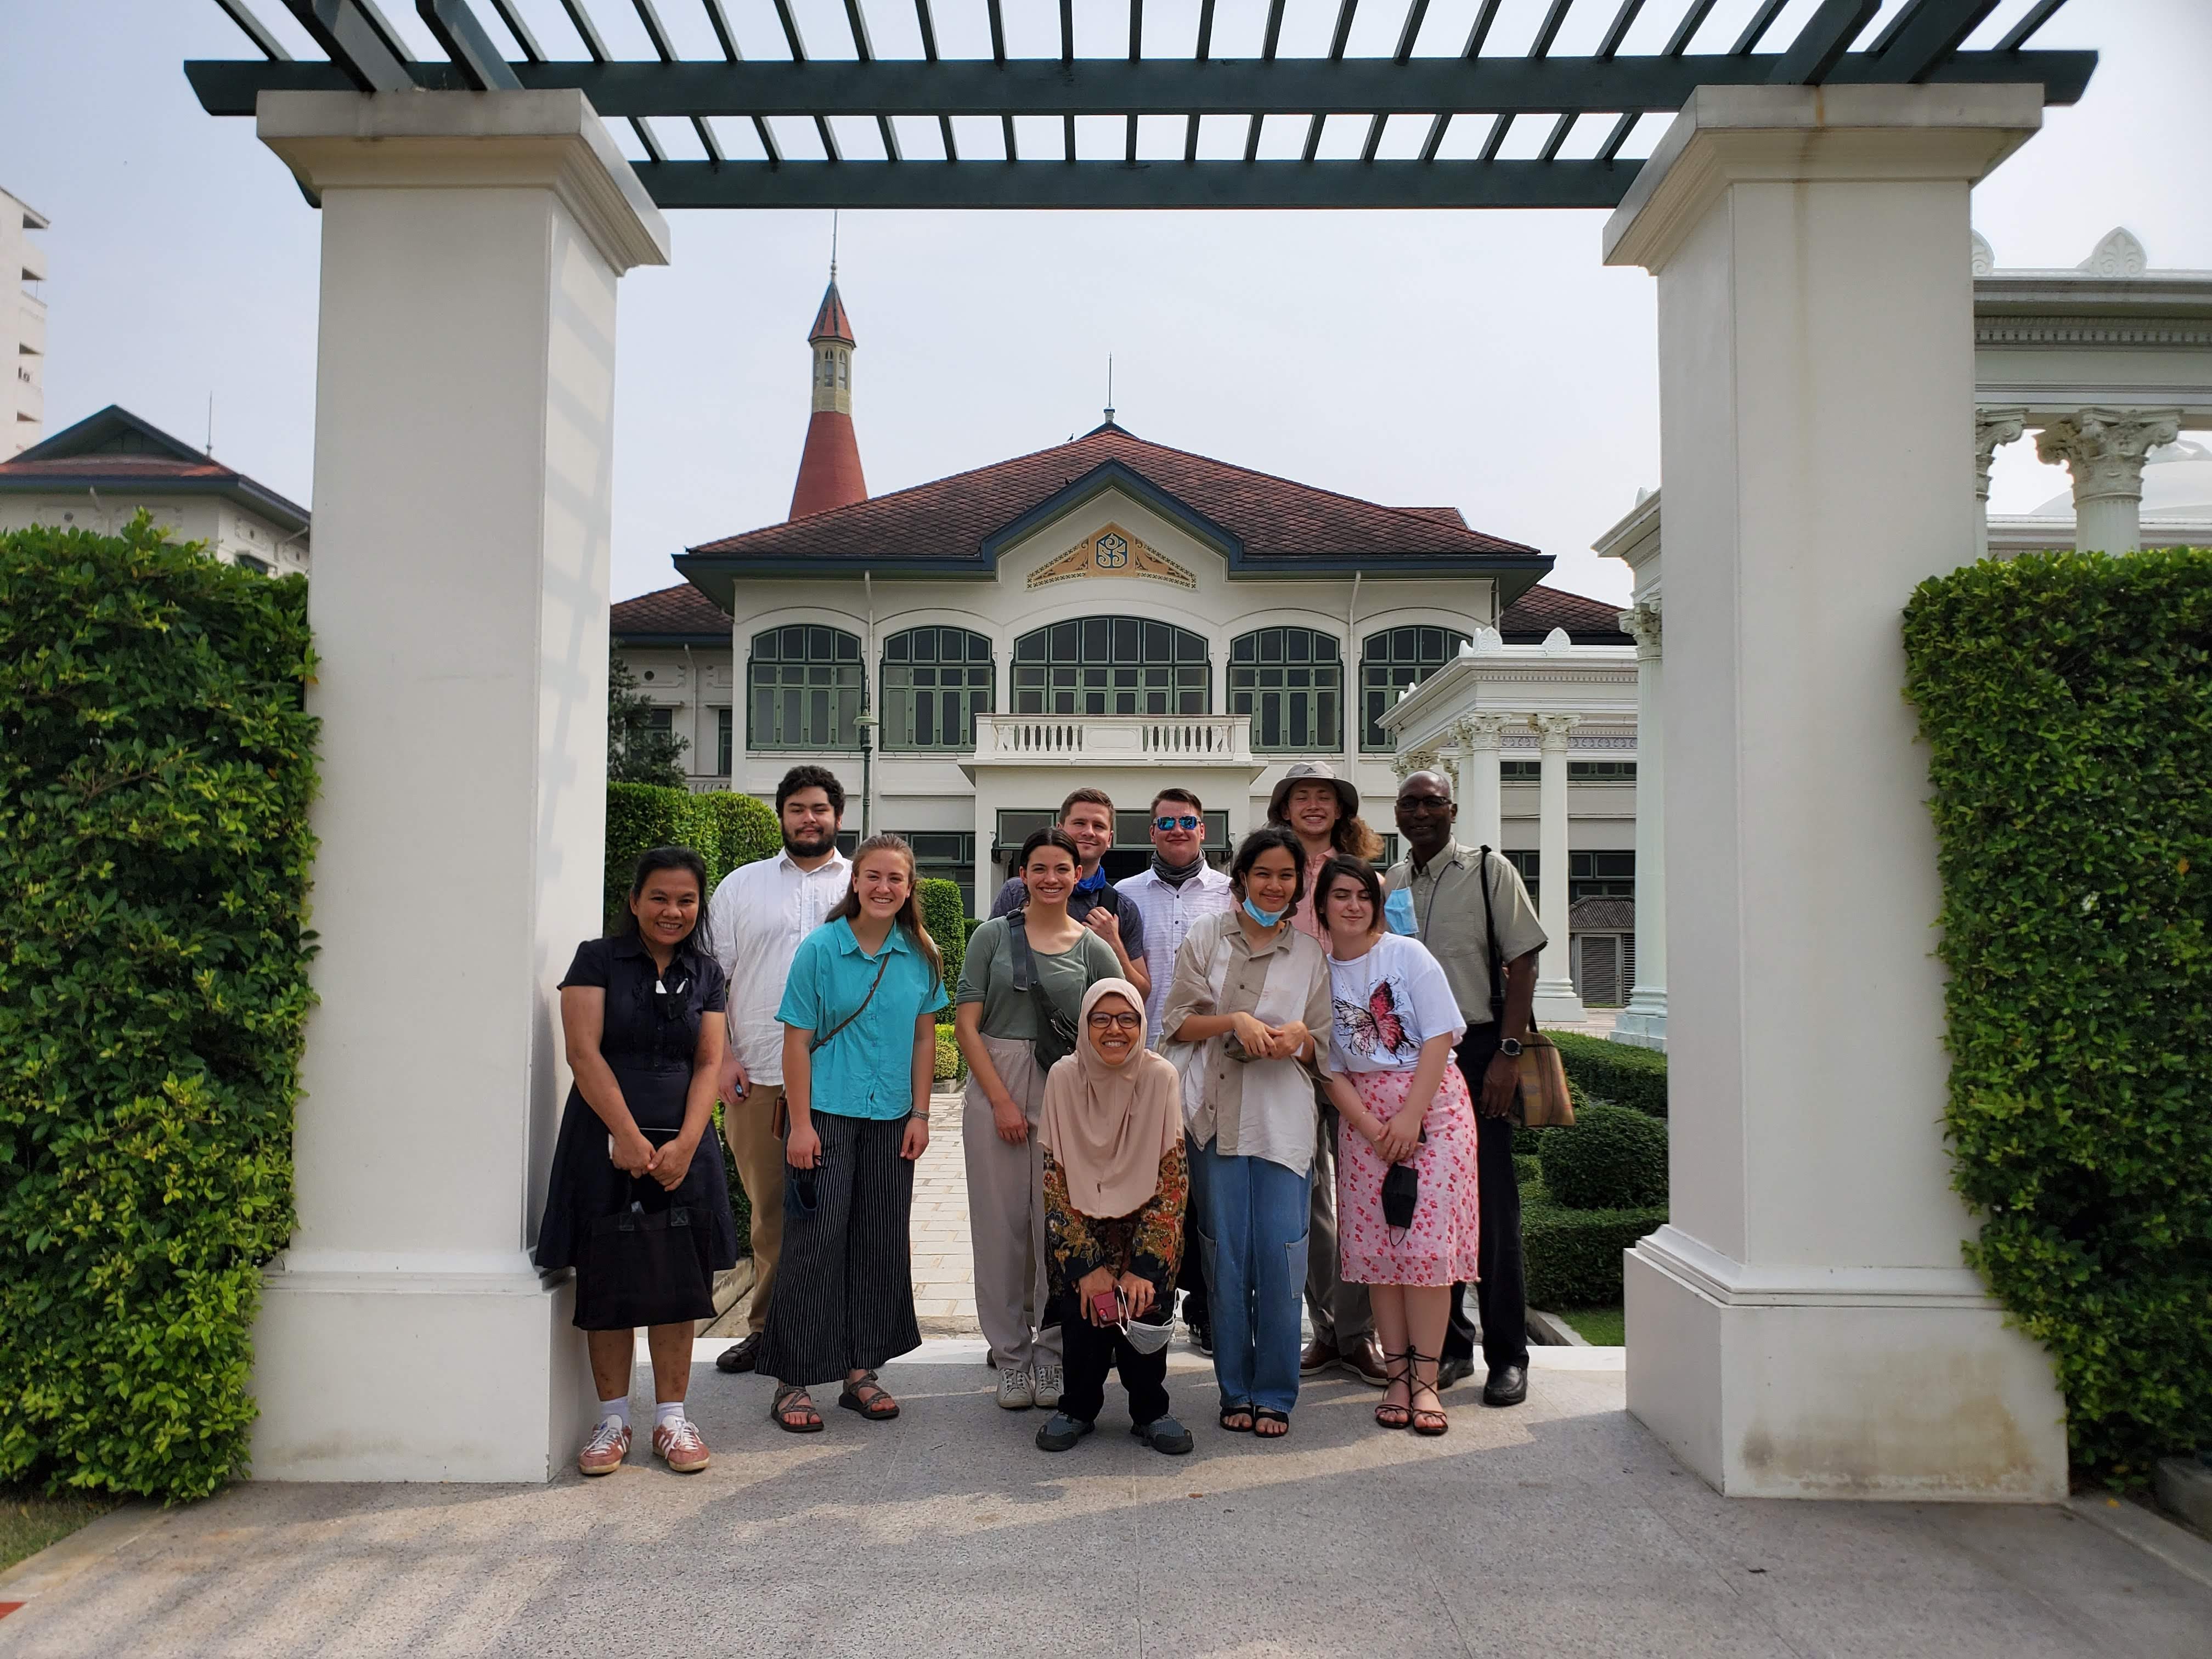 Group photo in front of Rama VI's palace